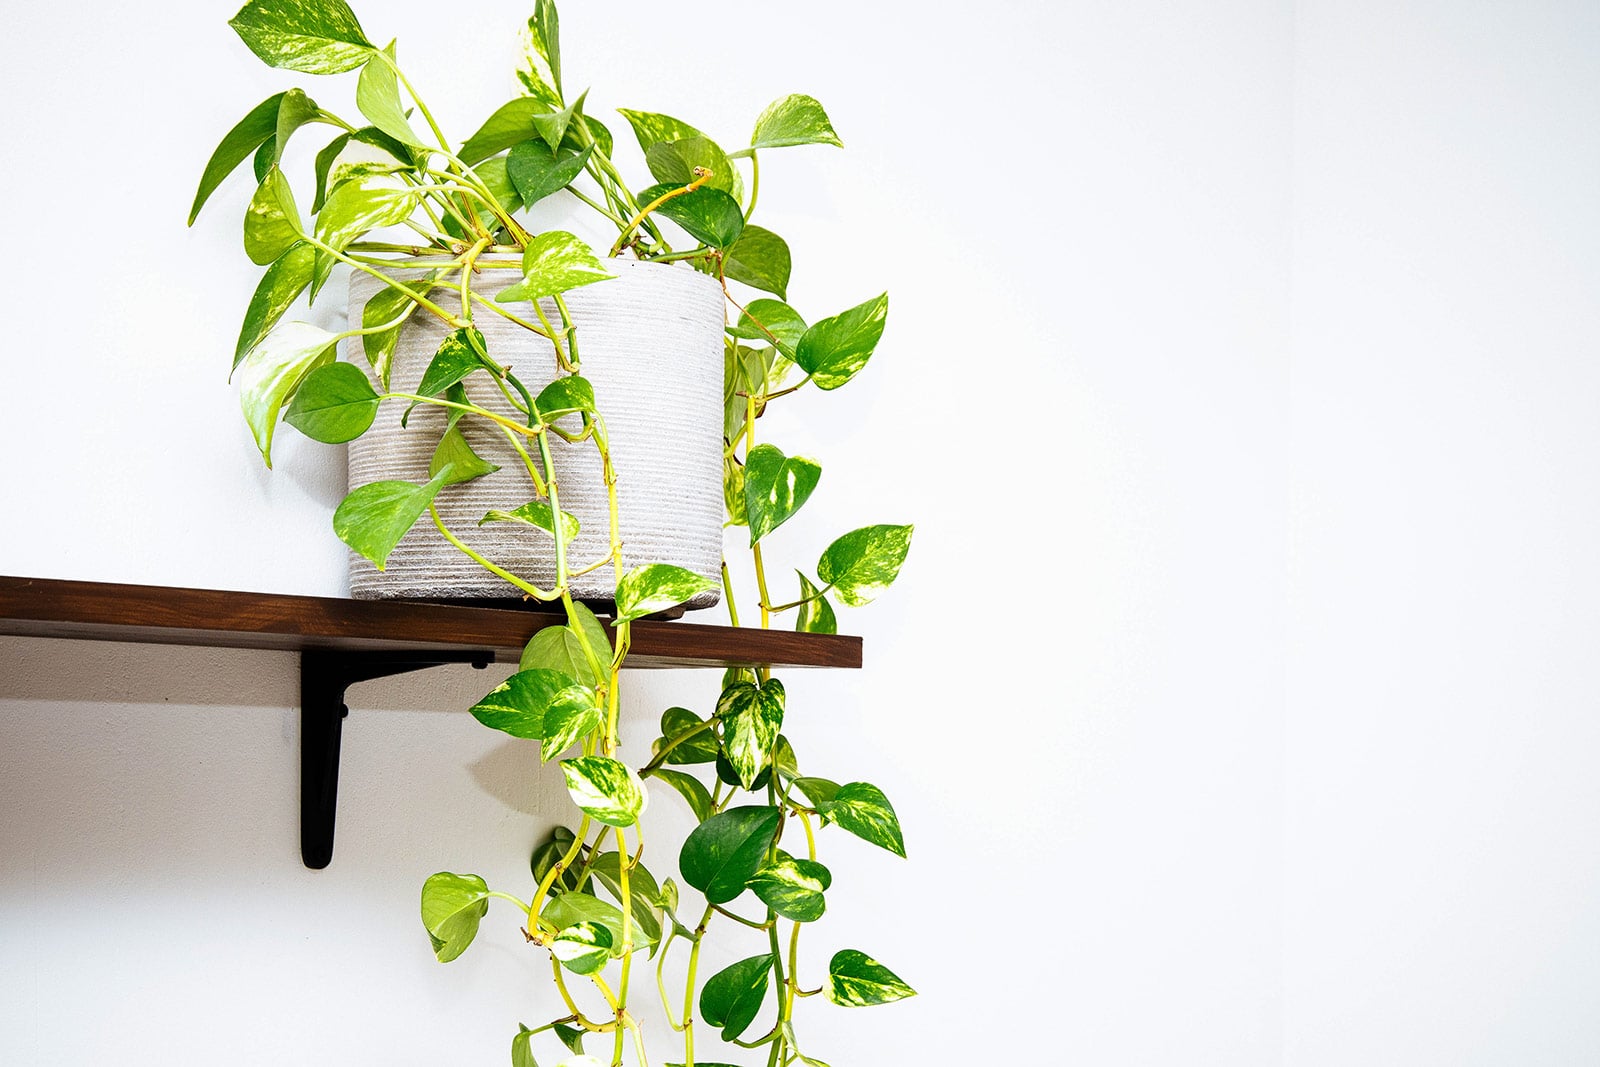 A potted Marble Queen pothos plant in a white woven pot, with vines trailing down from a shelf on the wall